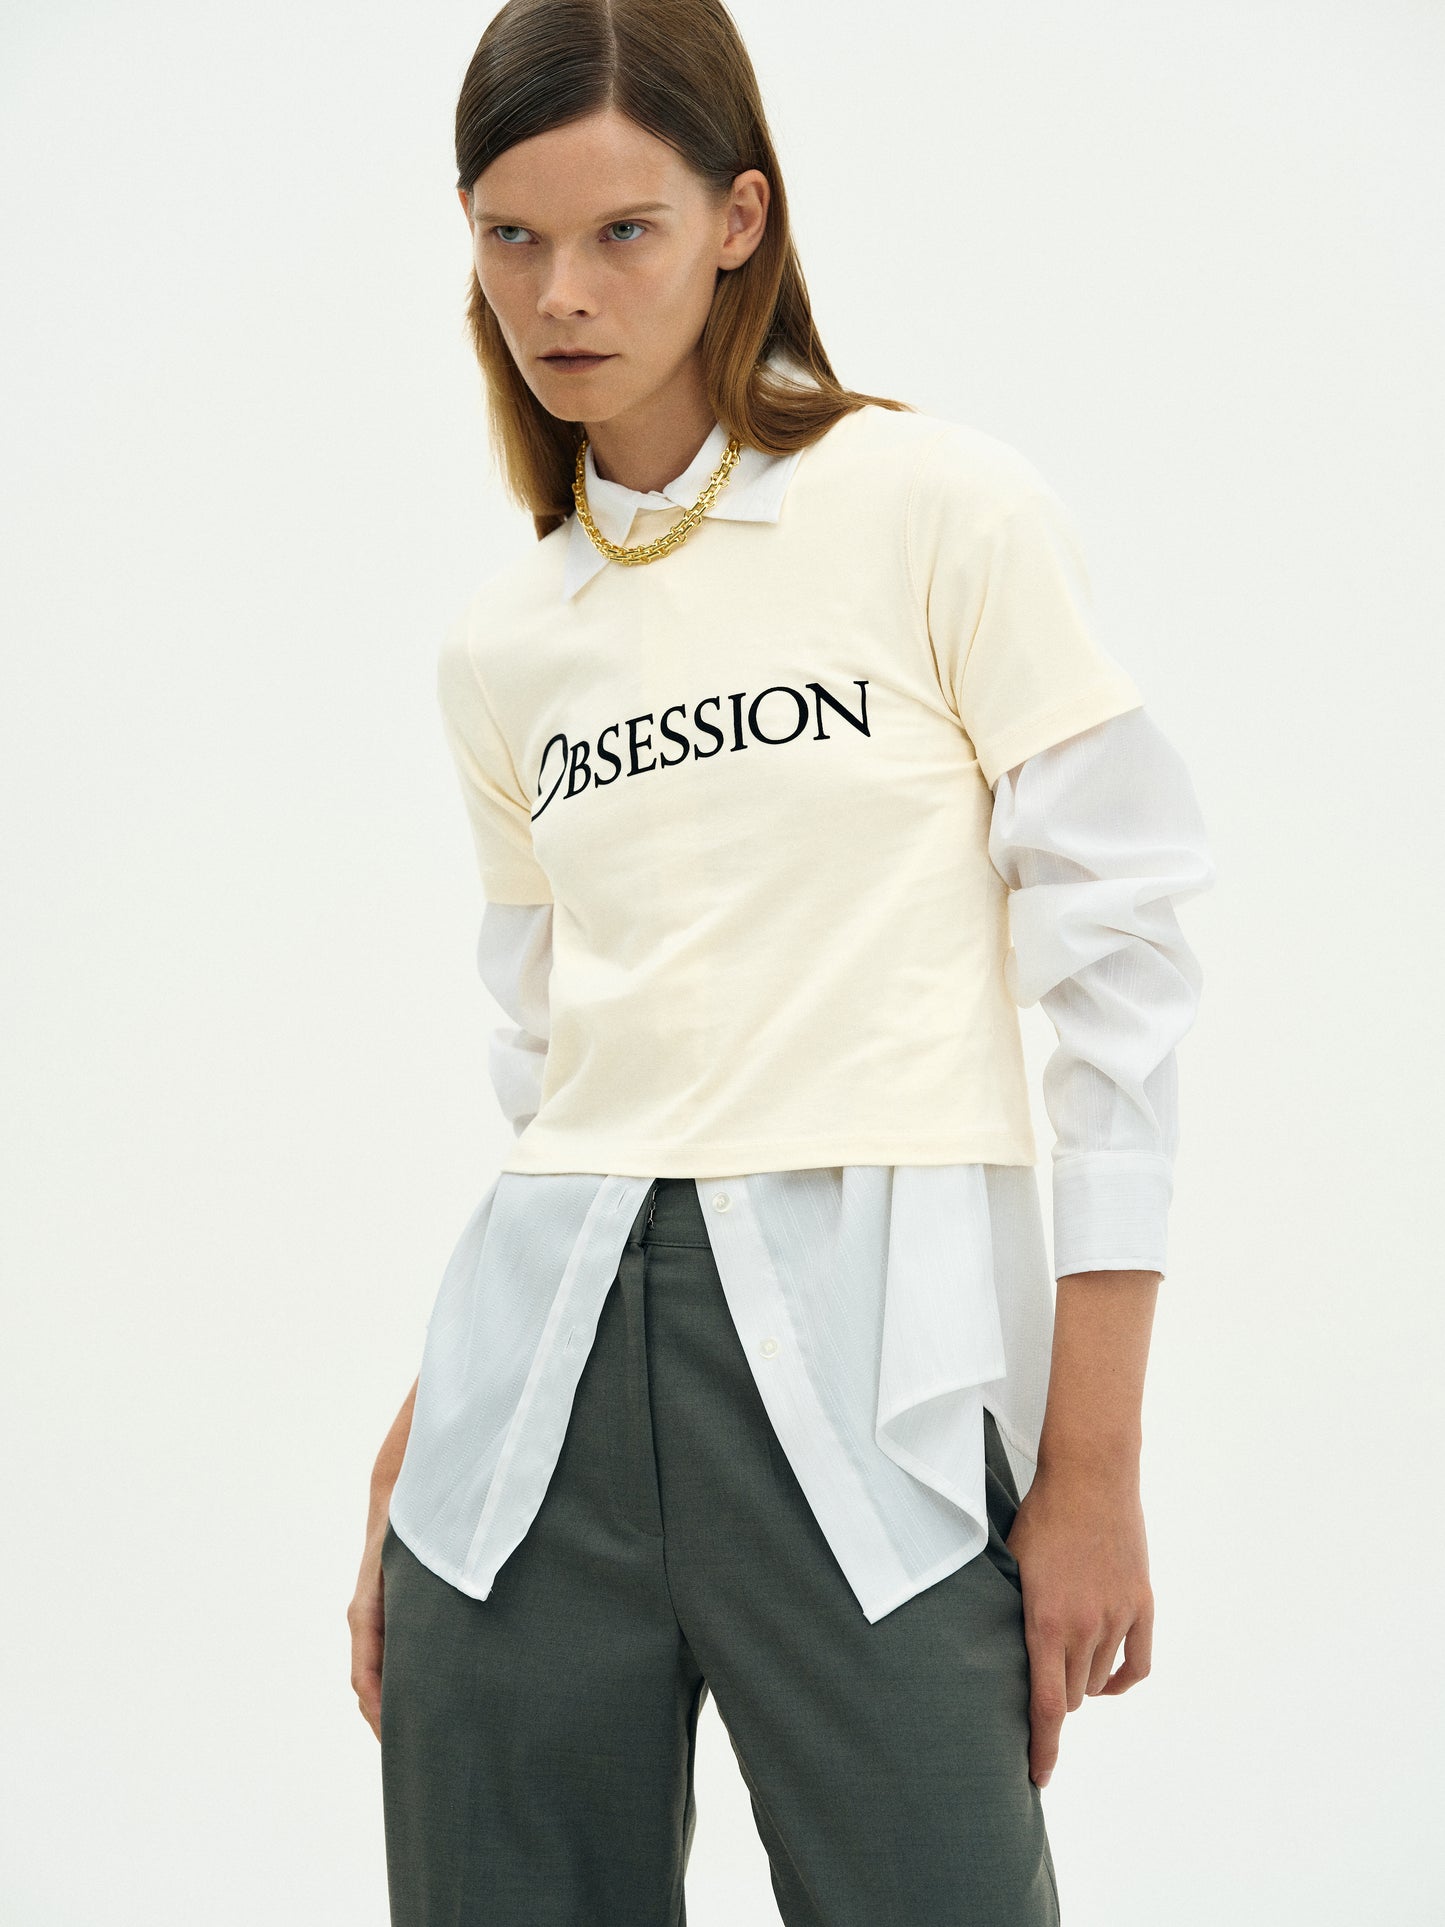 'Obsession' Baby T-shirt, Cream